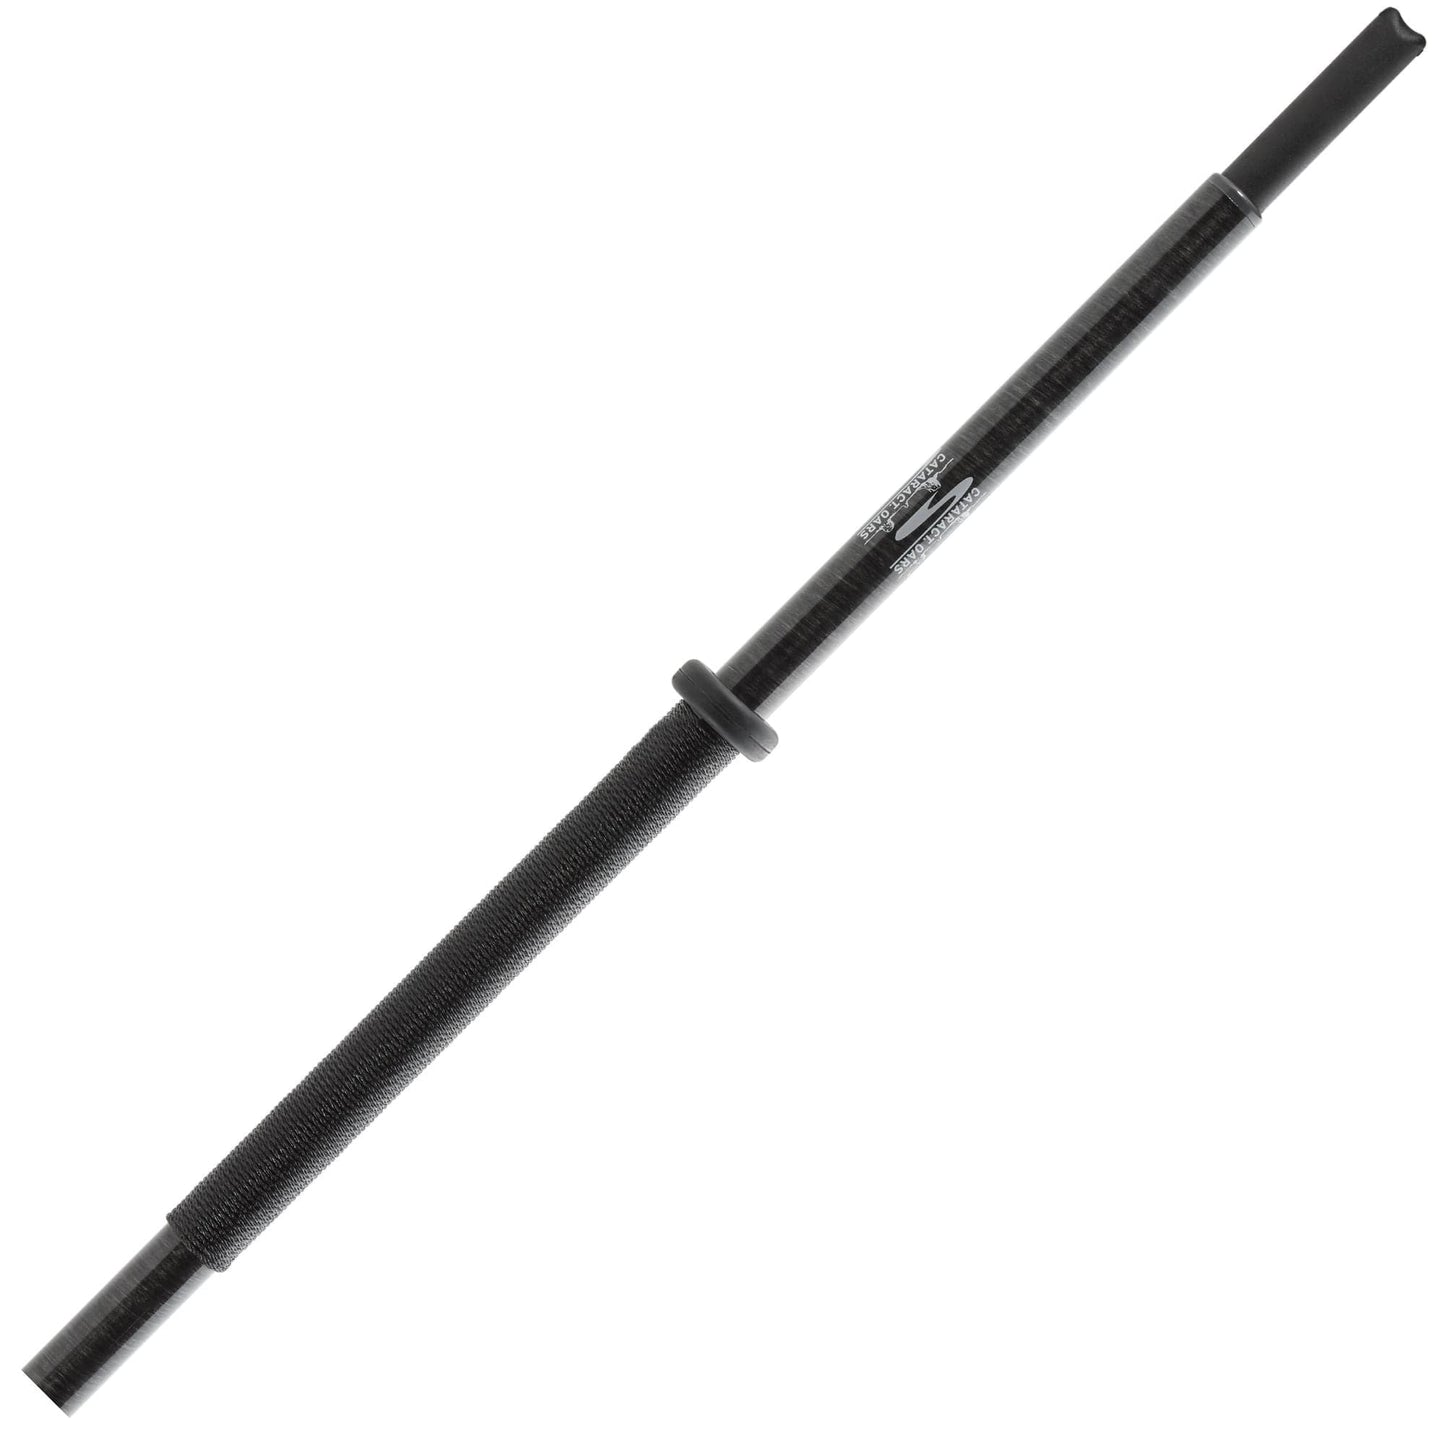 Featuring the Cataract SGG Rope Wrap Counter Balanced Oar Shaft oar manufactured by Cataract shown here from one angle.